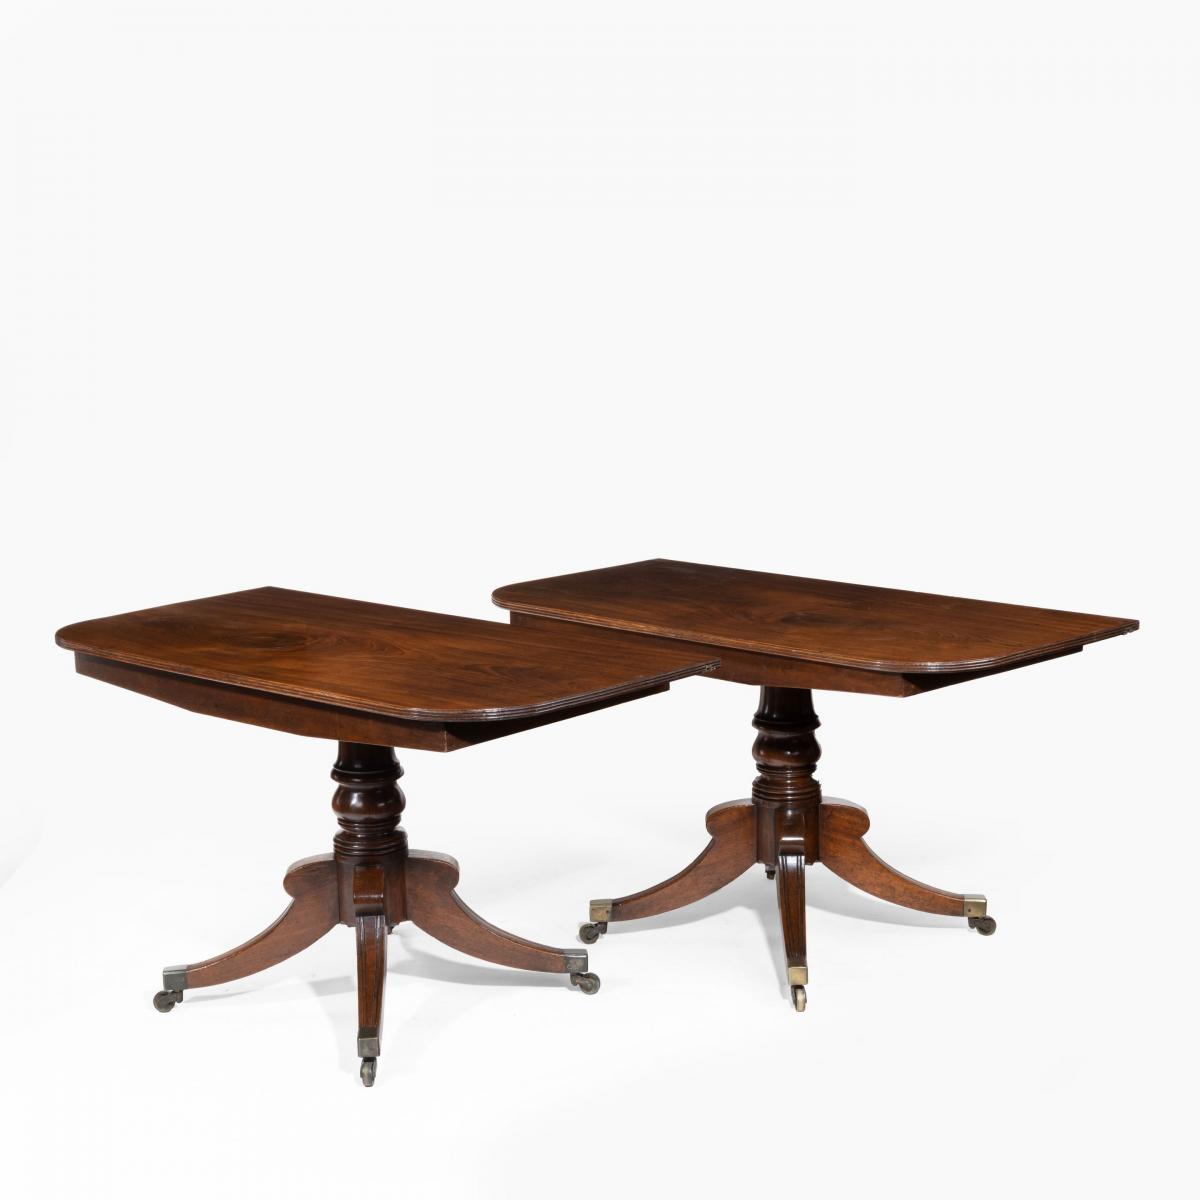 George III pair of mahogany console tables which convert into a twin pillar dining table